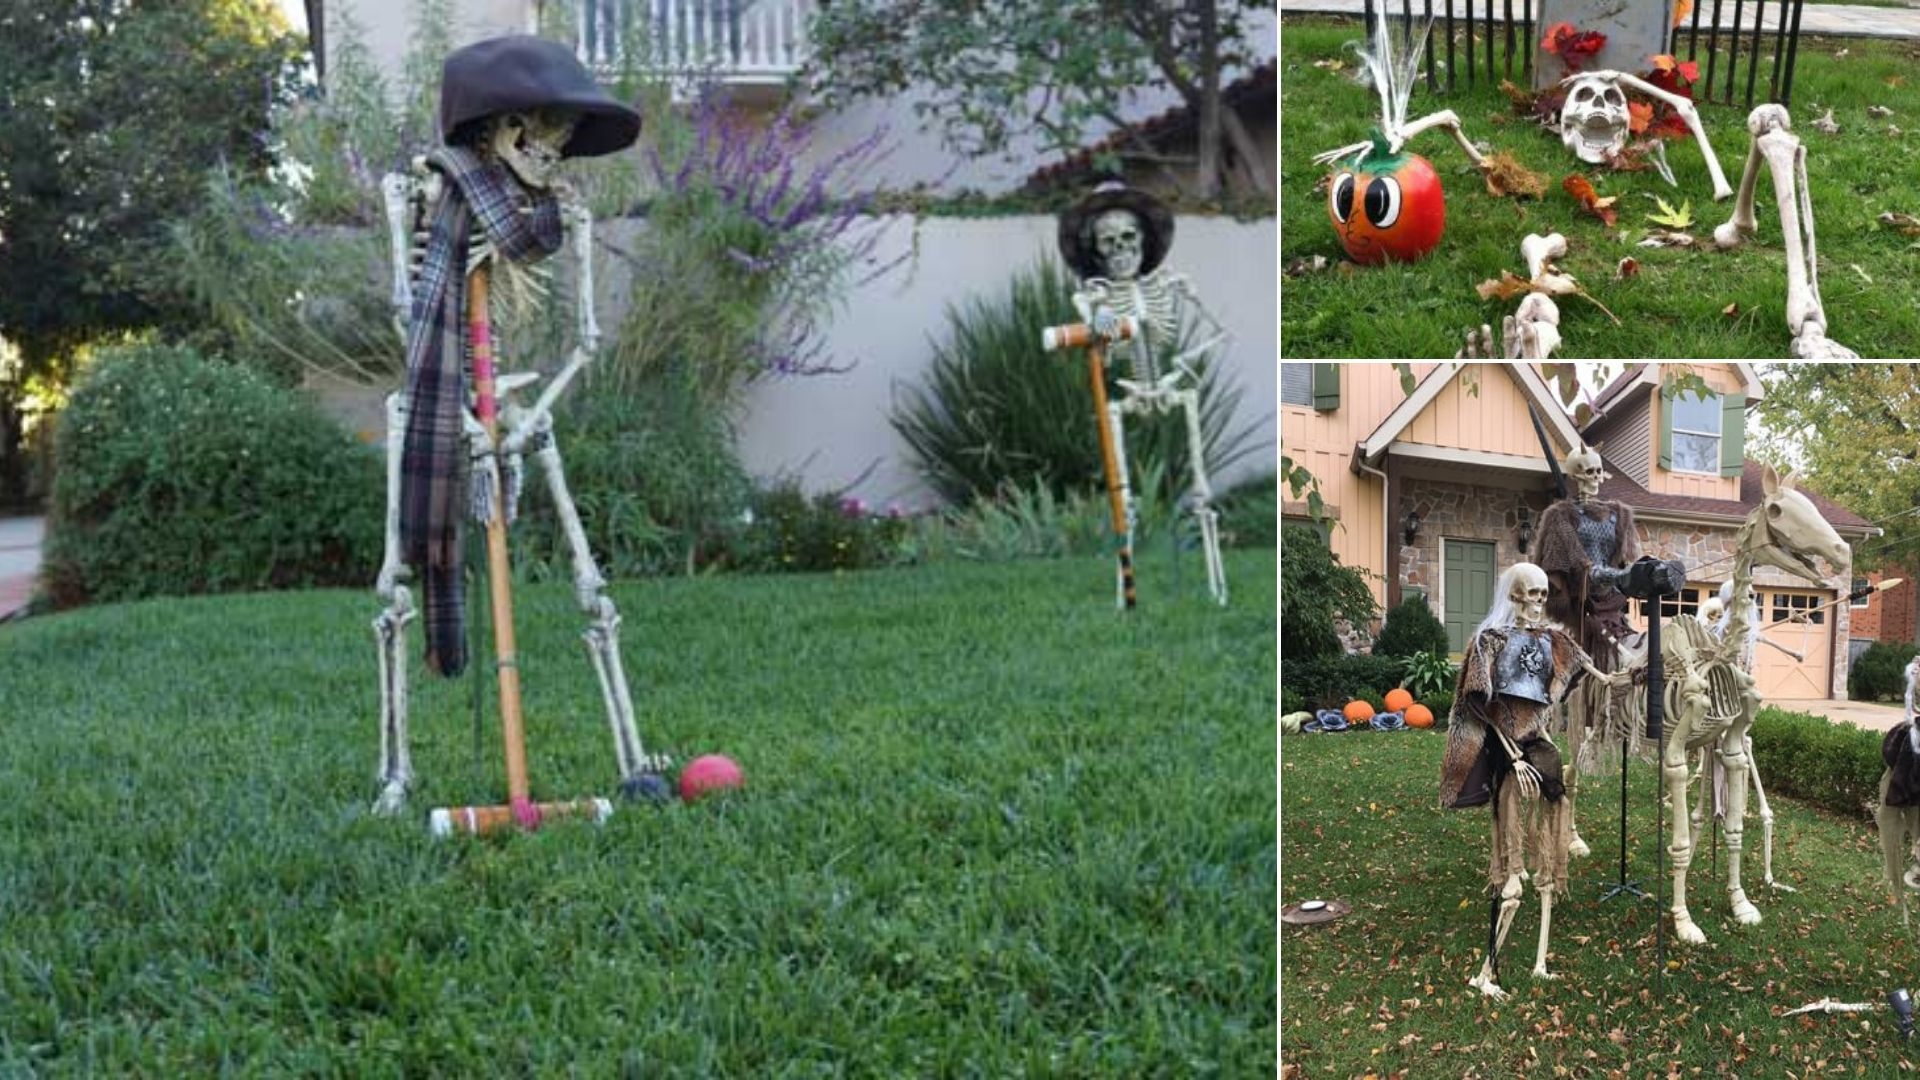 decorate your lawn this Halloween.jpg